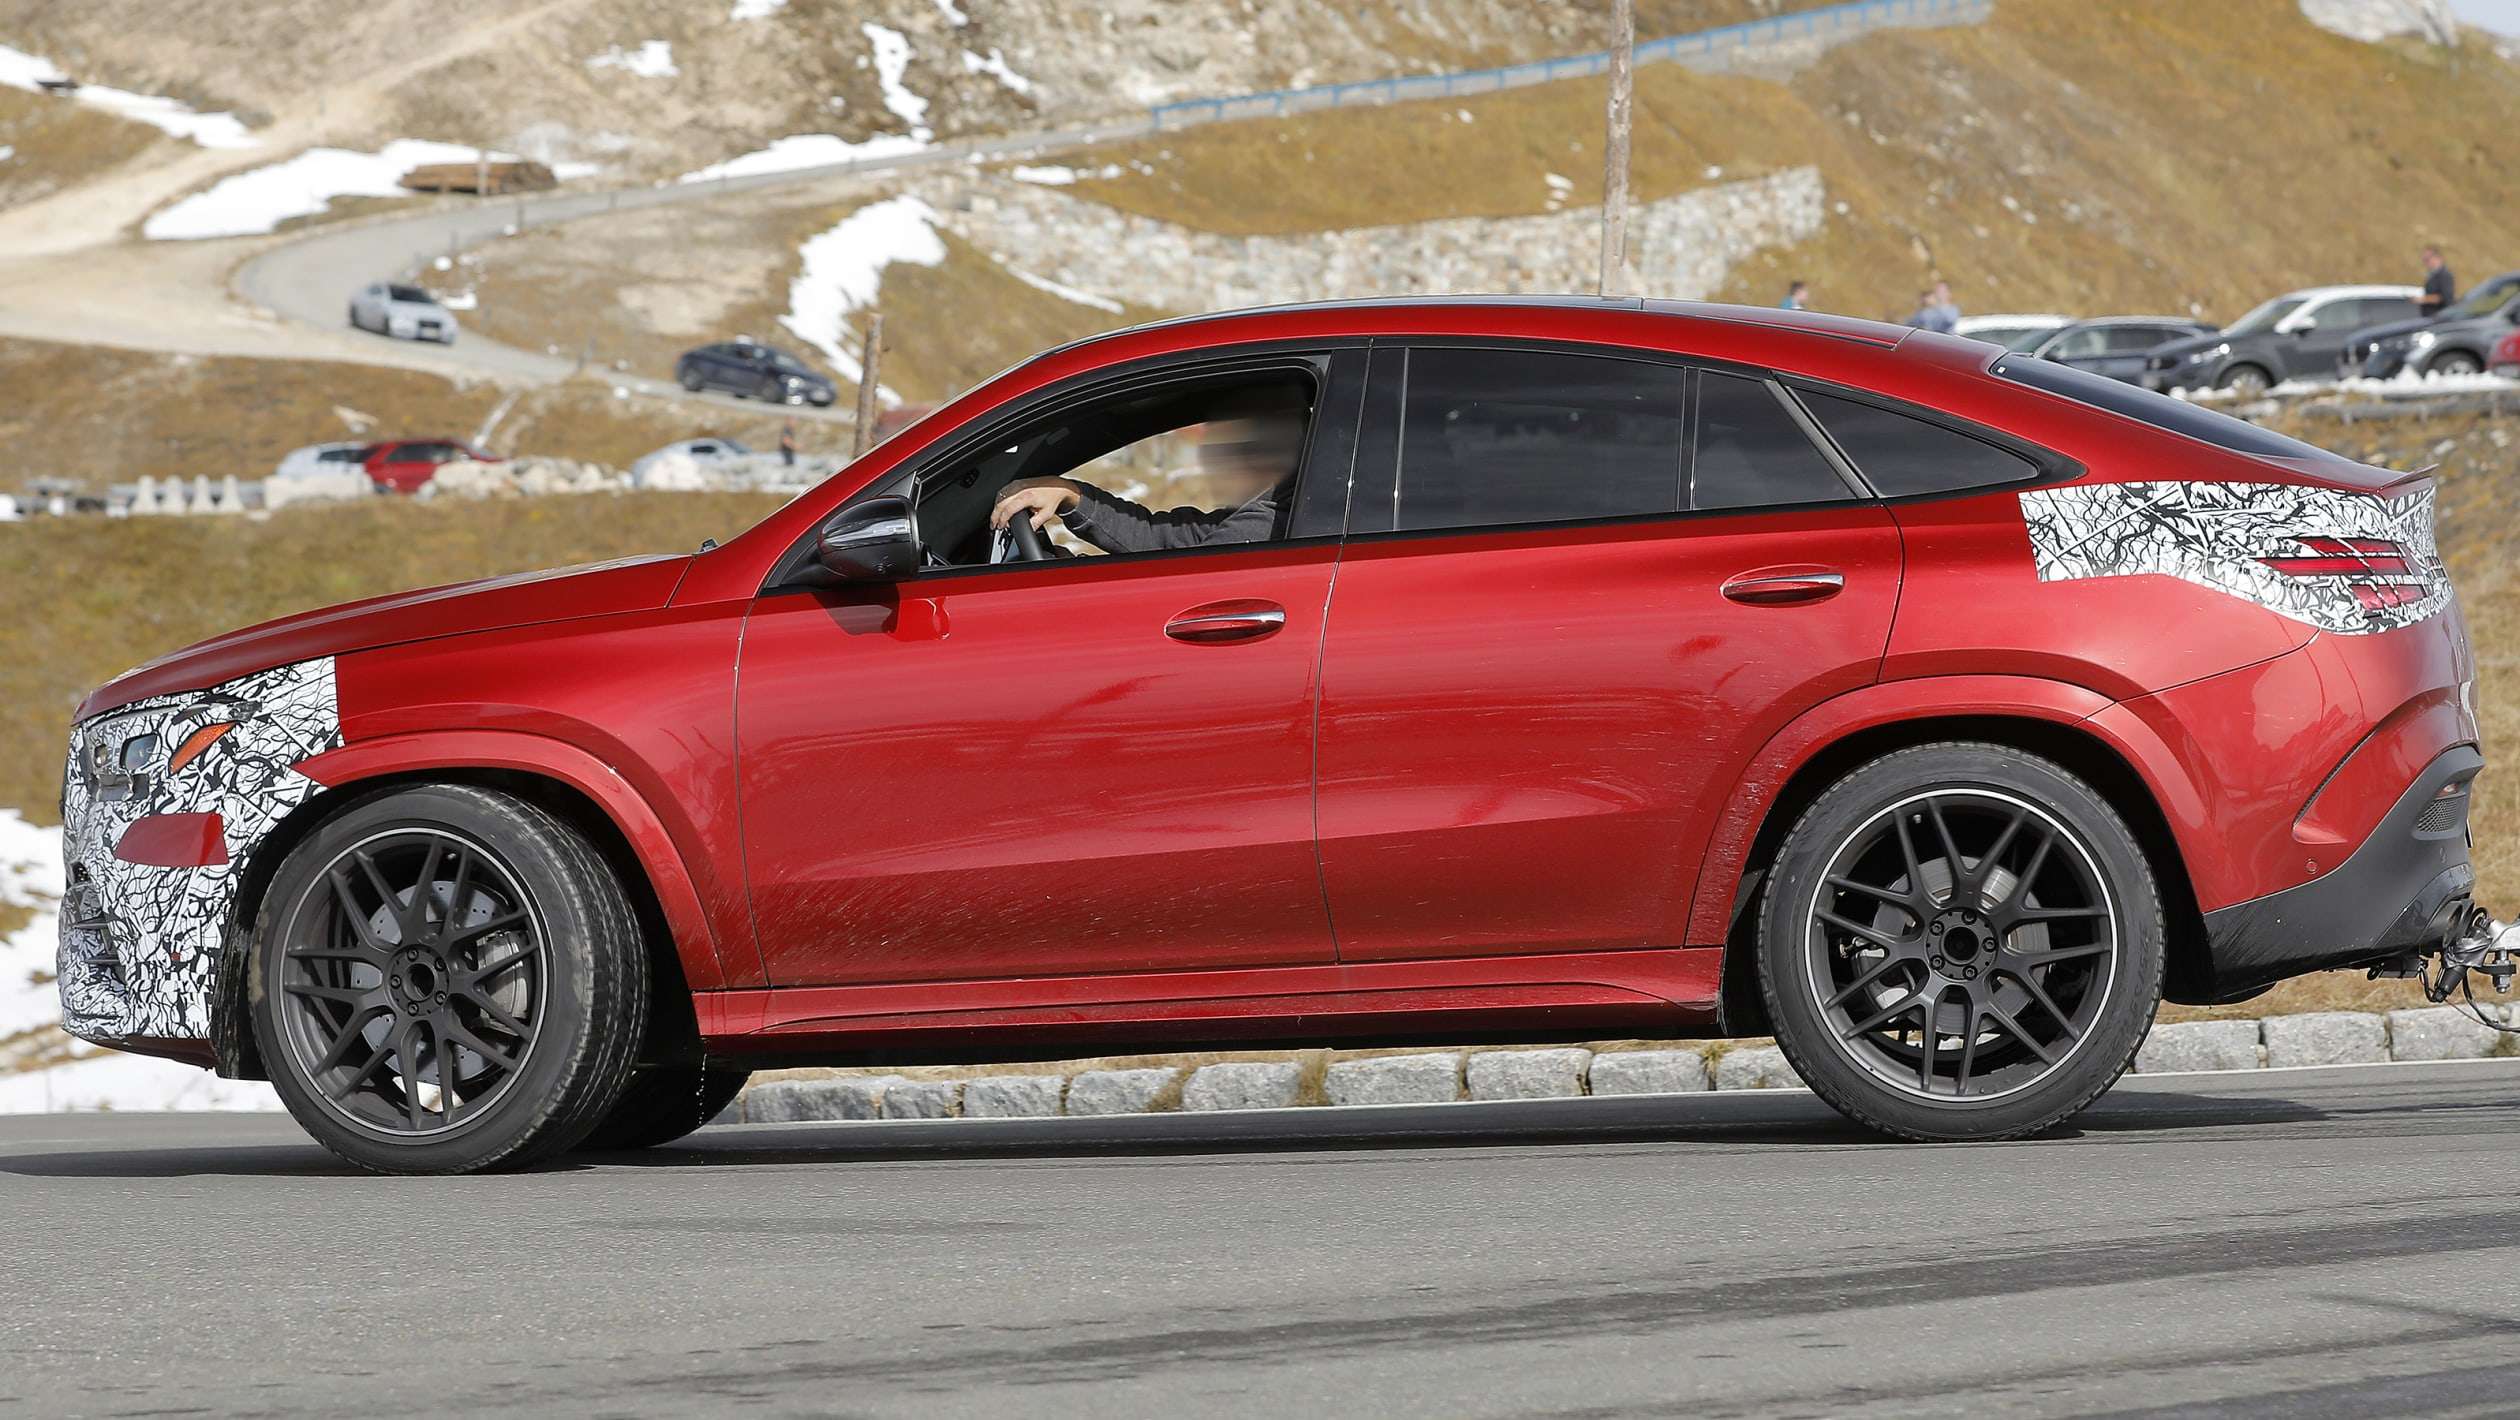 Mercedes GLE Coupe testing - side/rear cornering